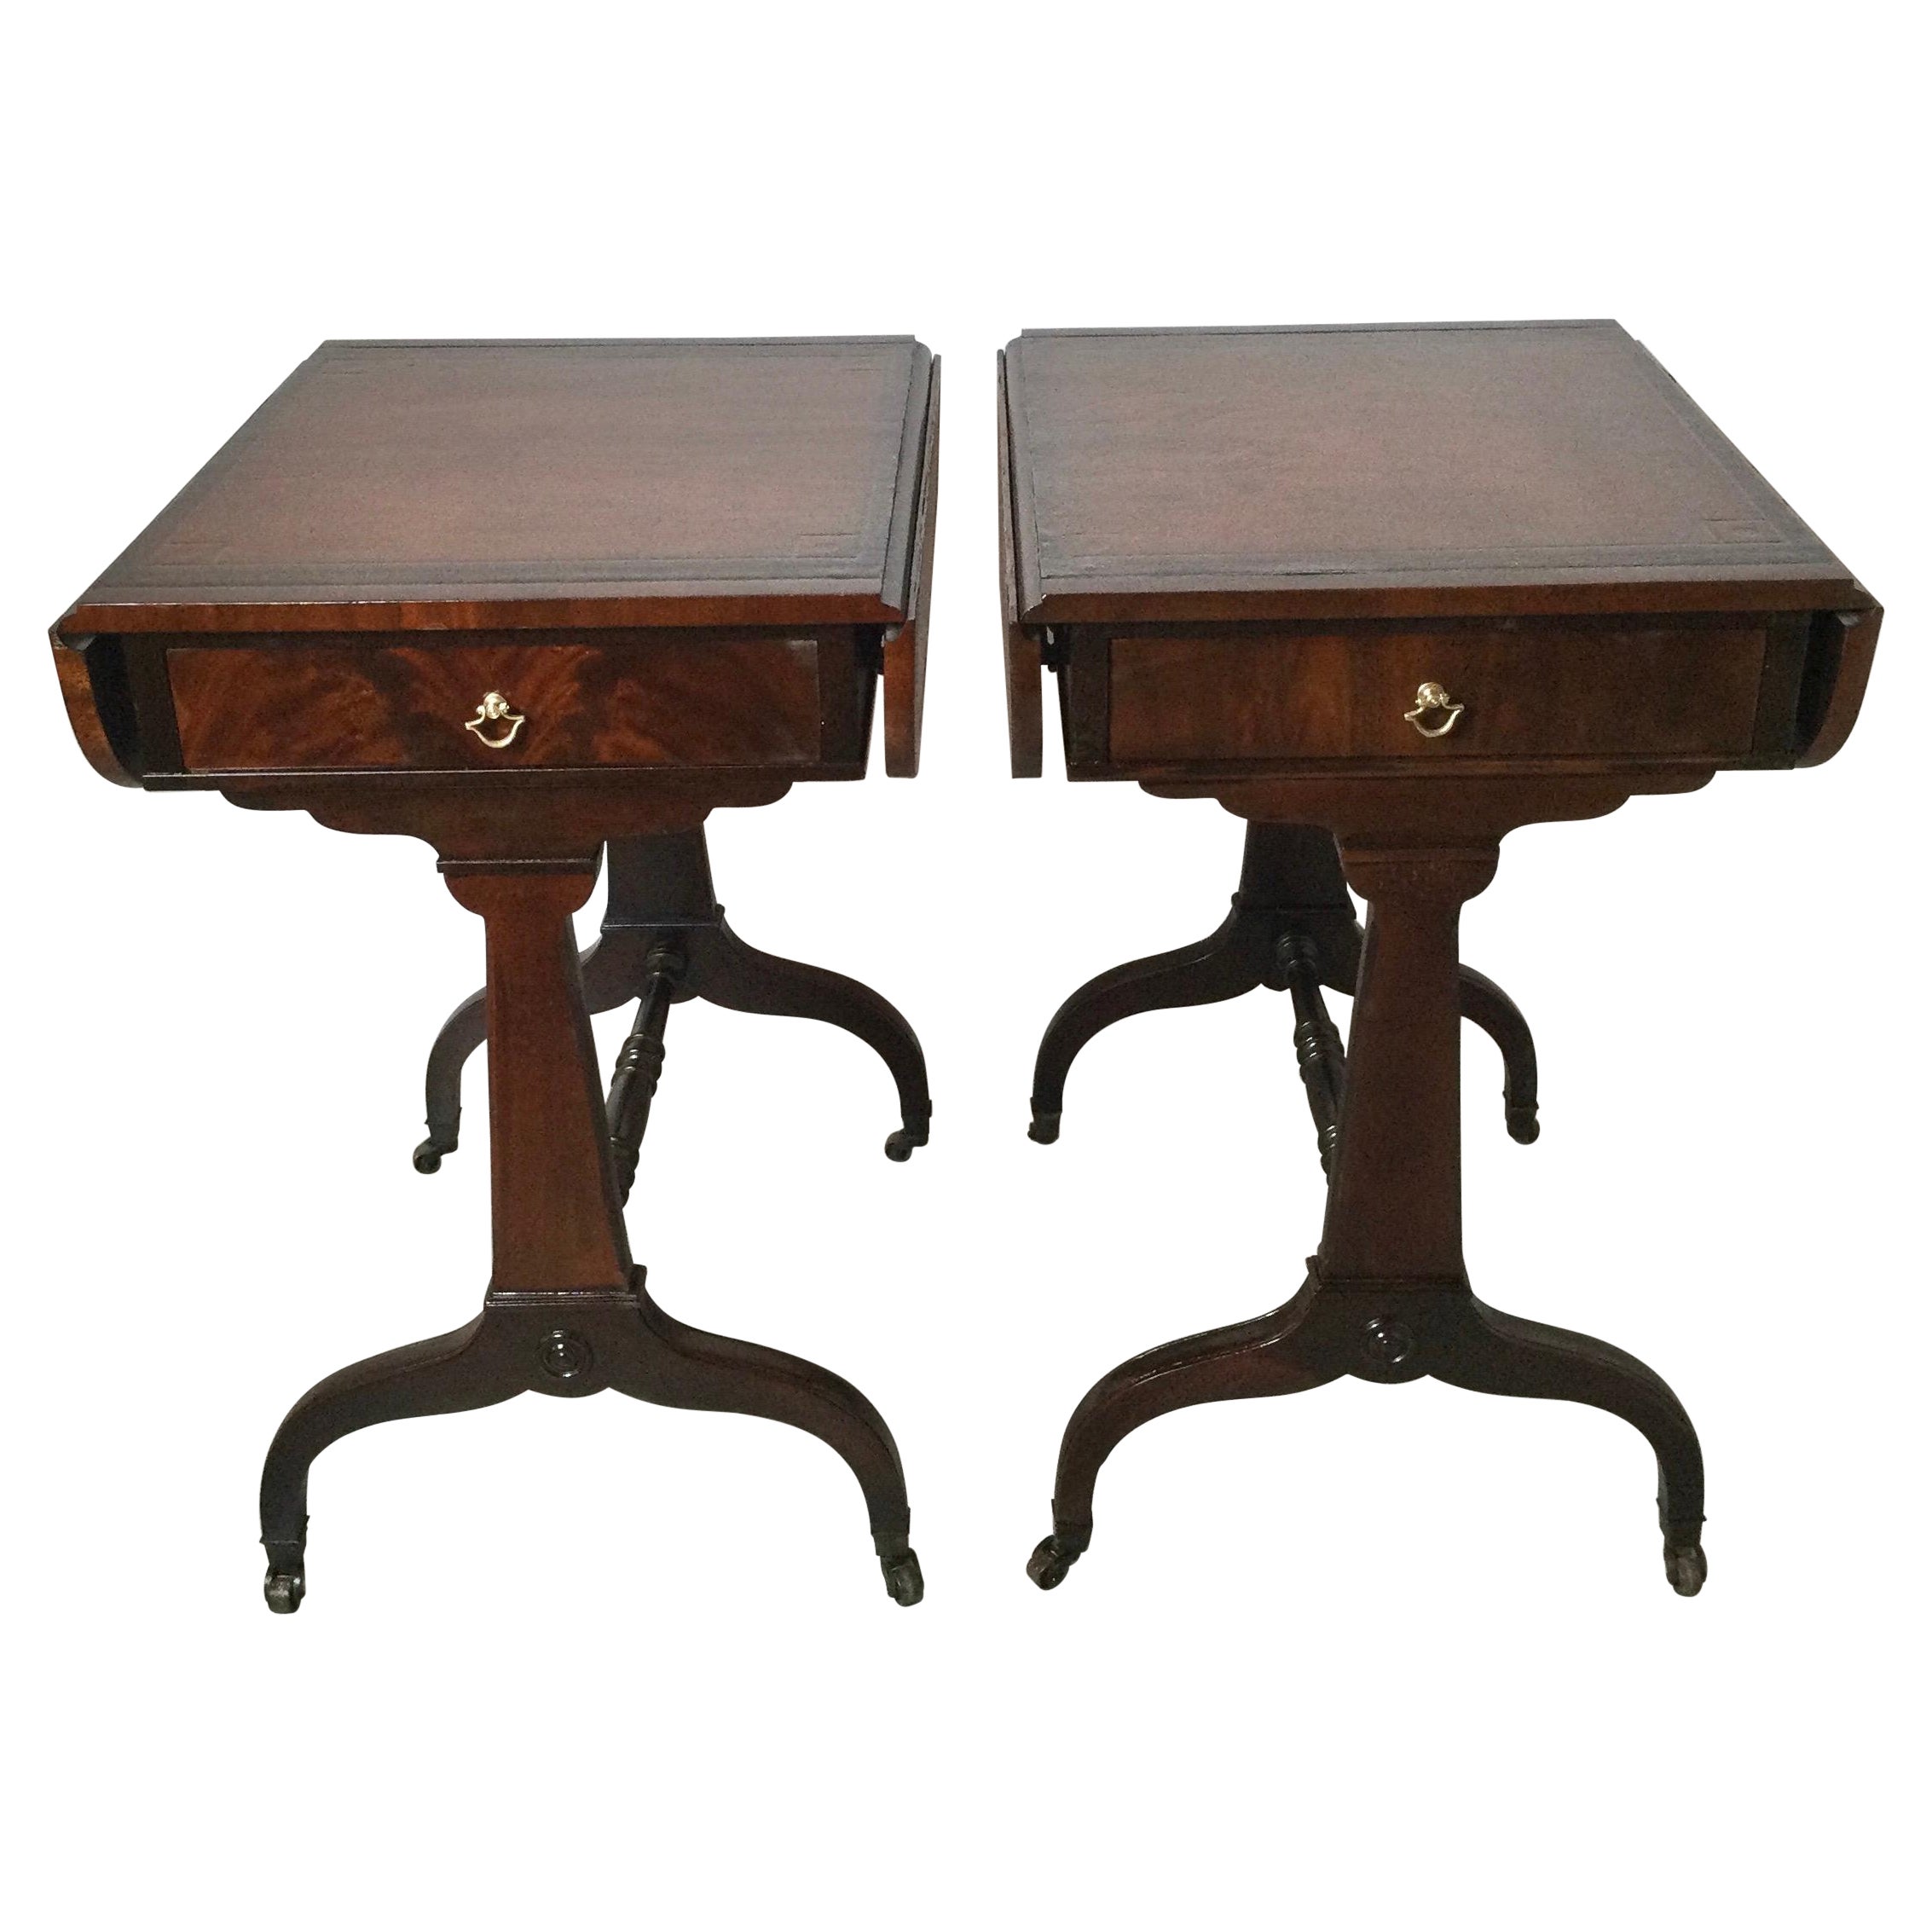 Pair of Mahogany Drop Leaf Side Tables